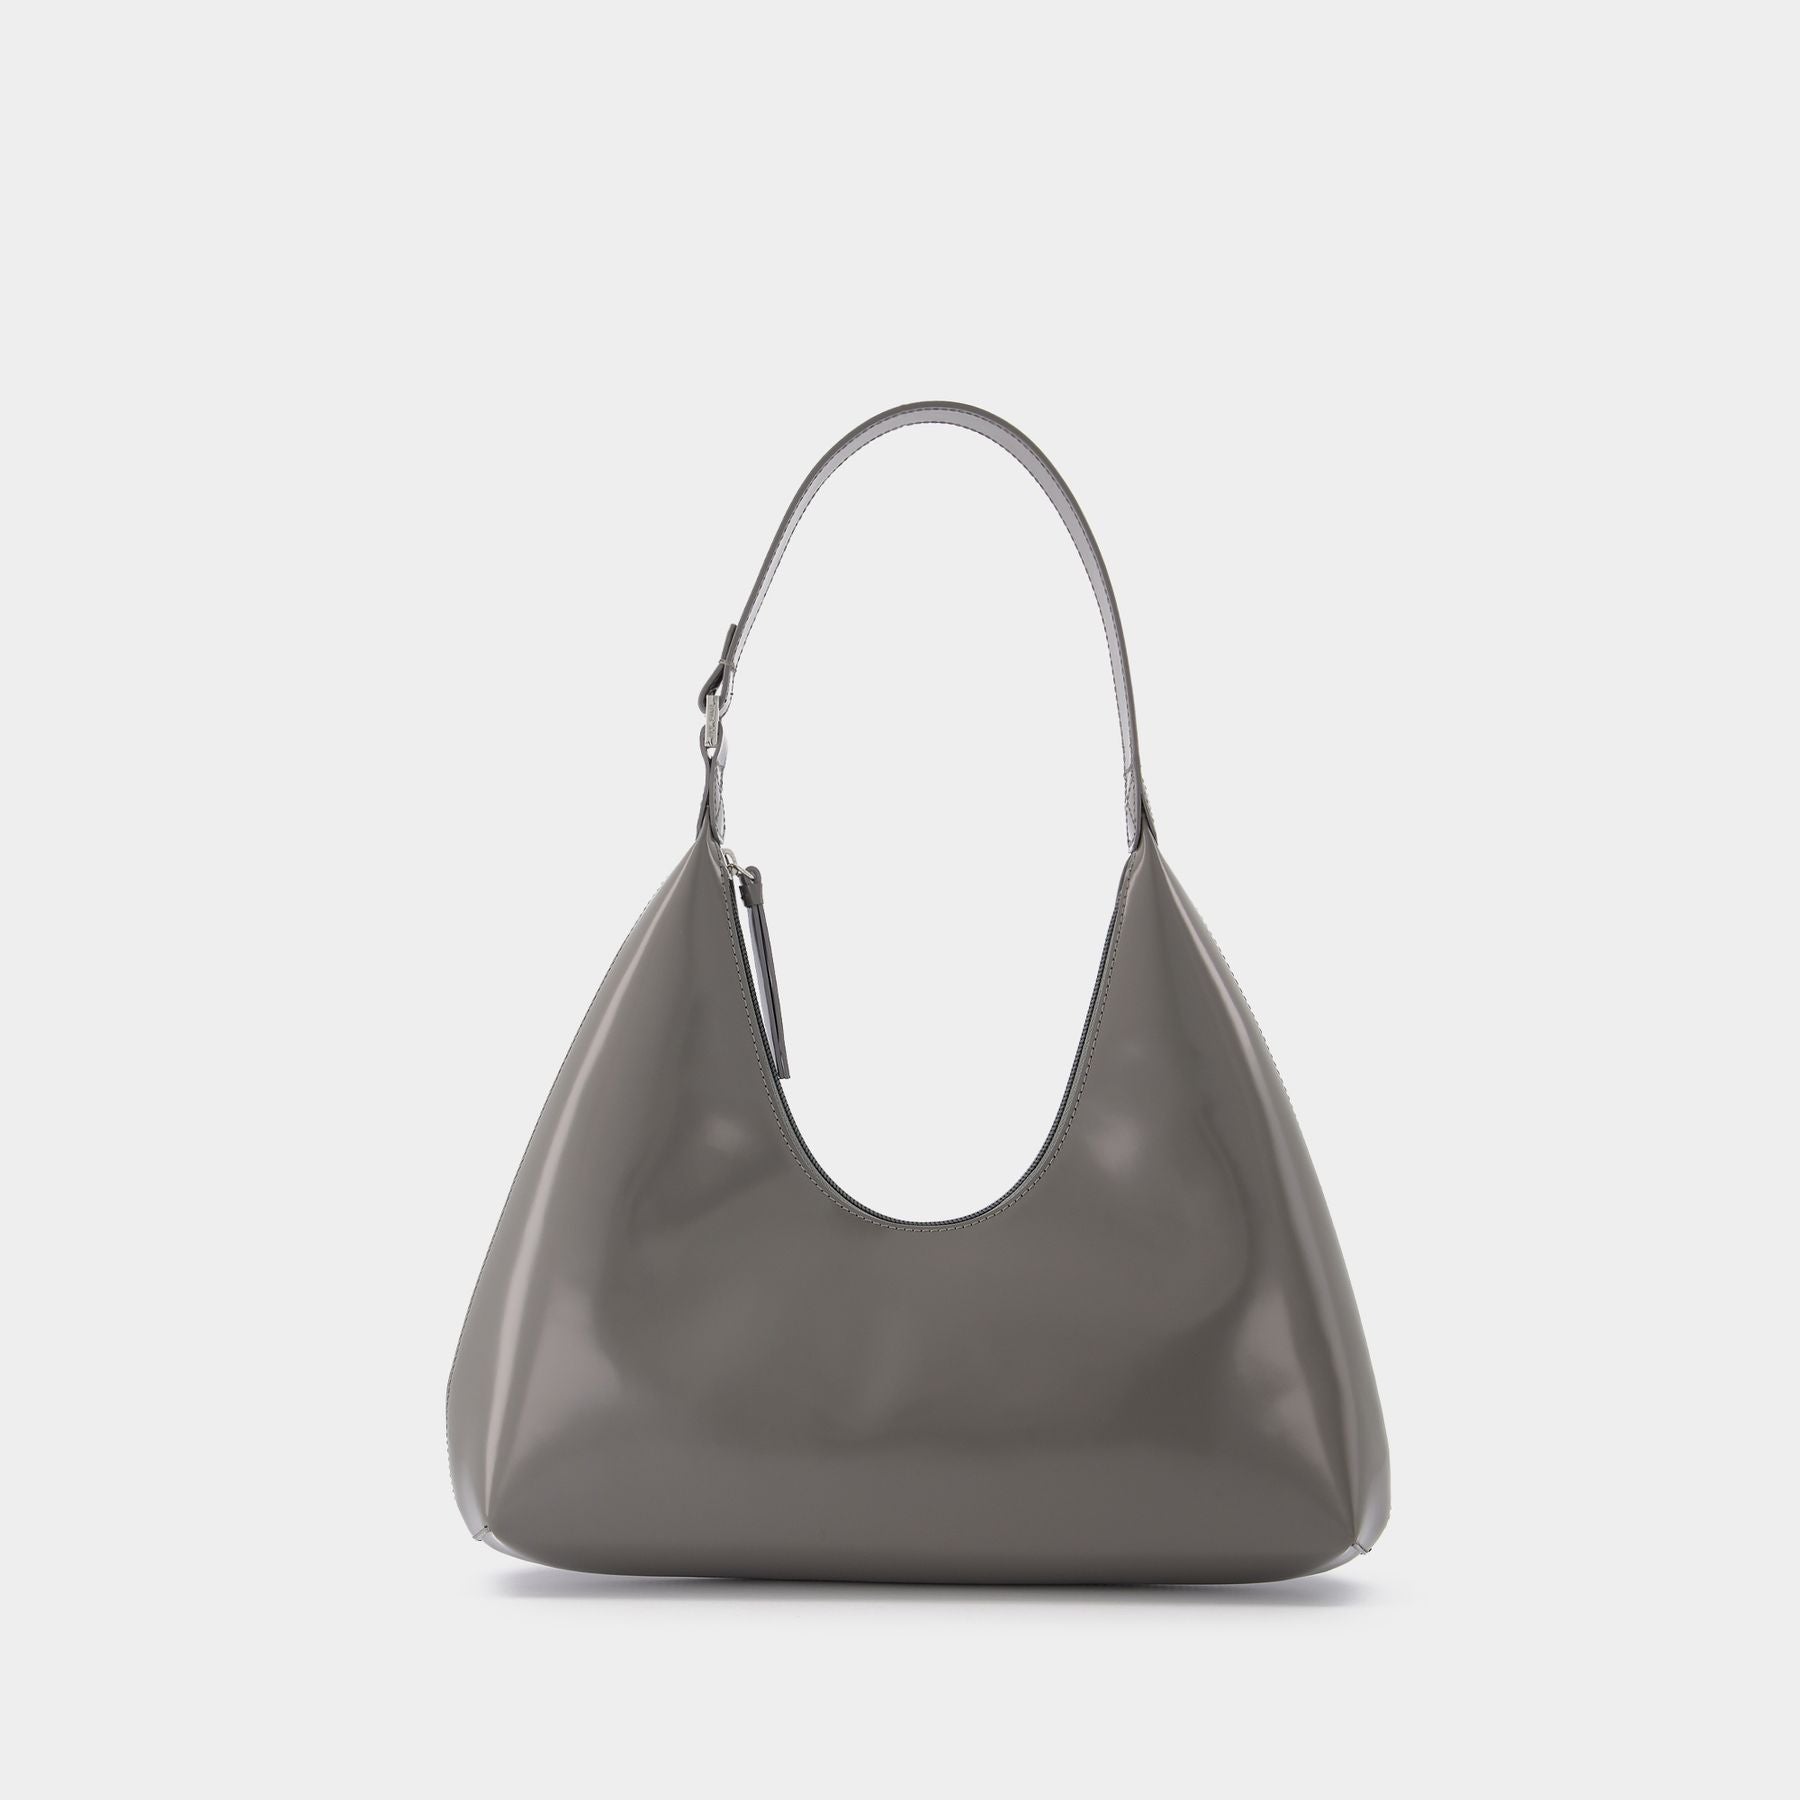 BY FAR Amber Bag in White